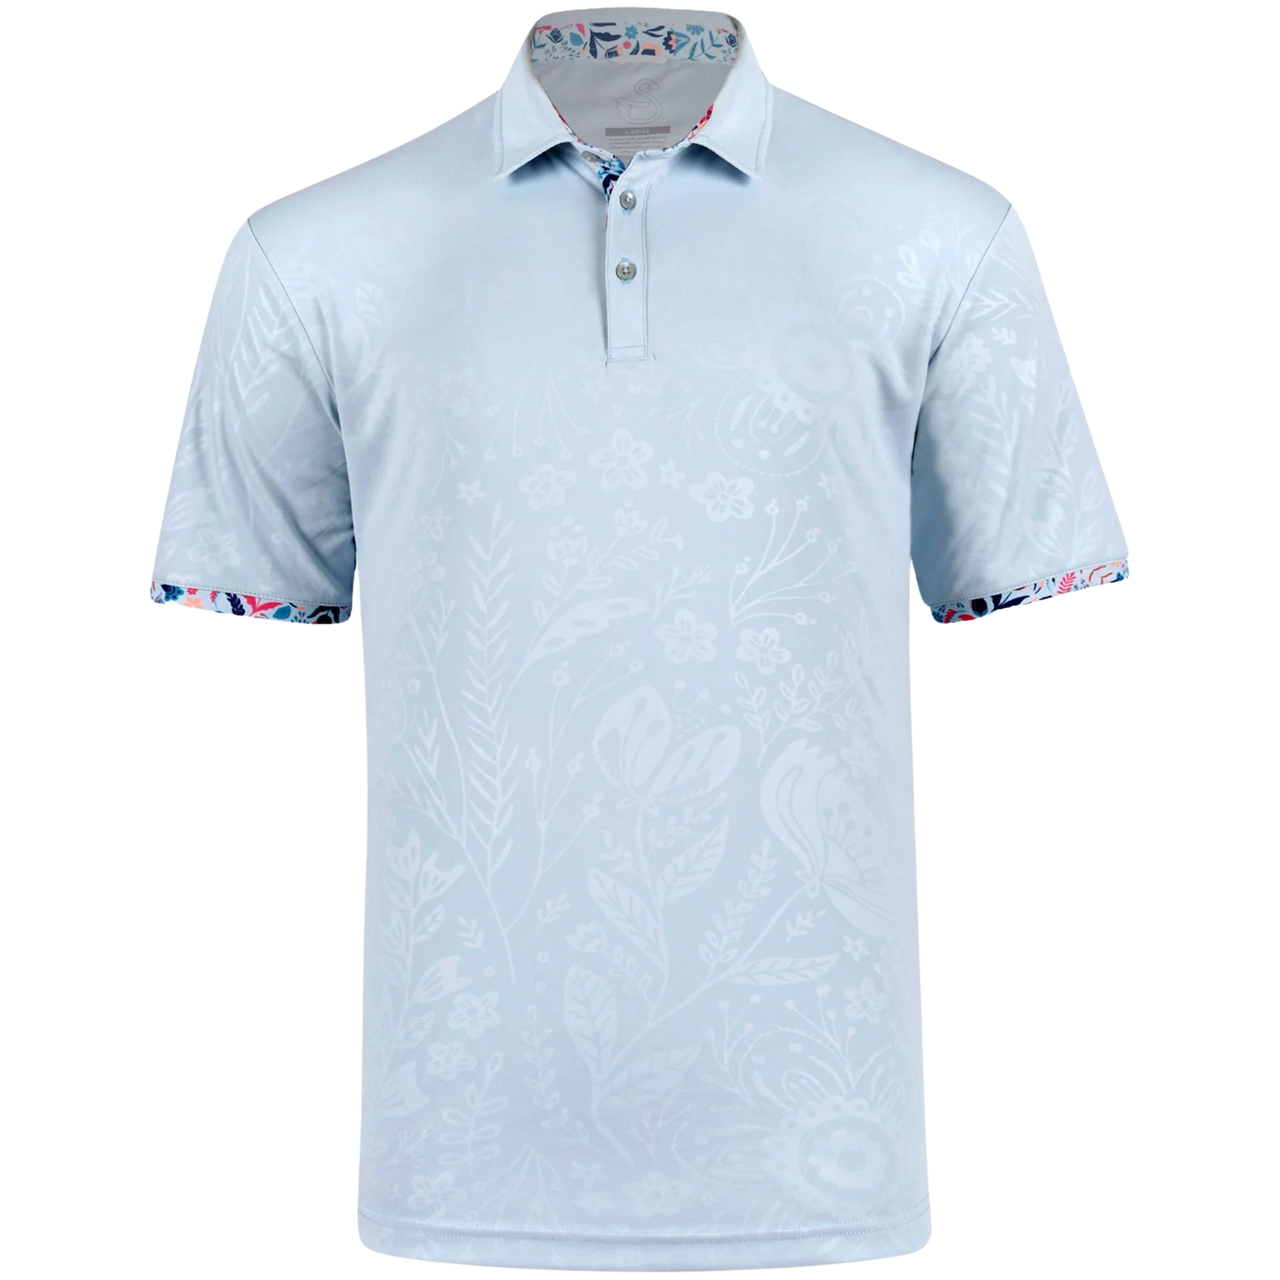 Swannies Behlmer Men's Polo